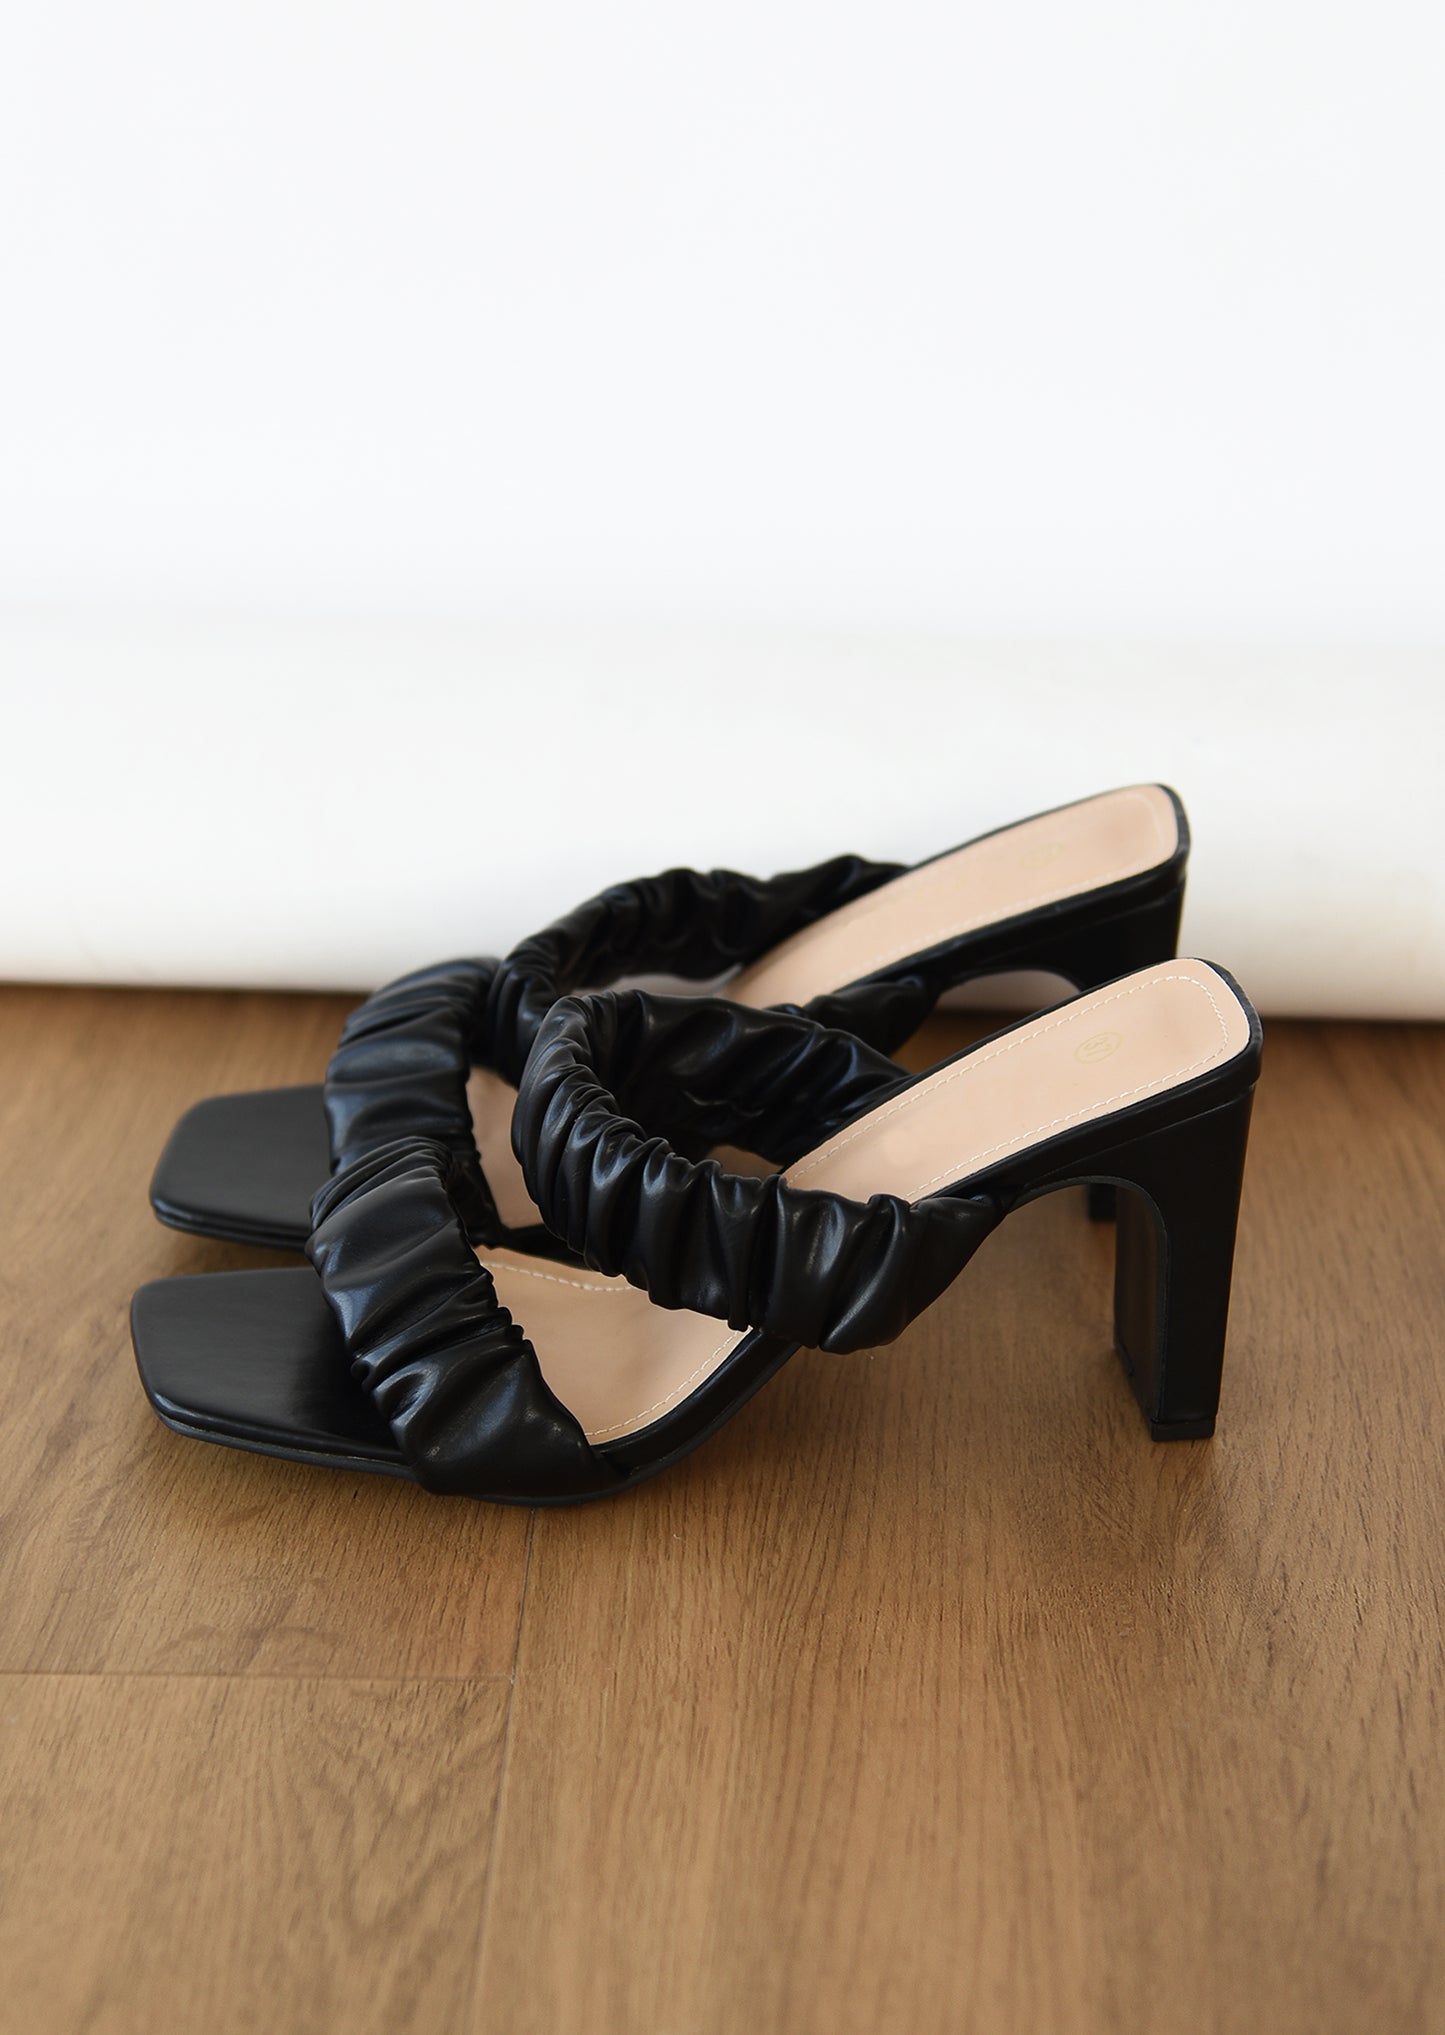 Square toe ruched heeled mules in black